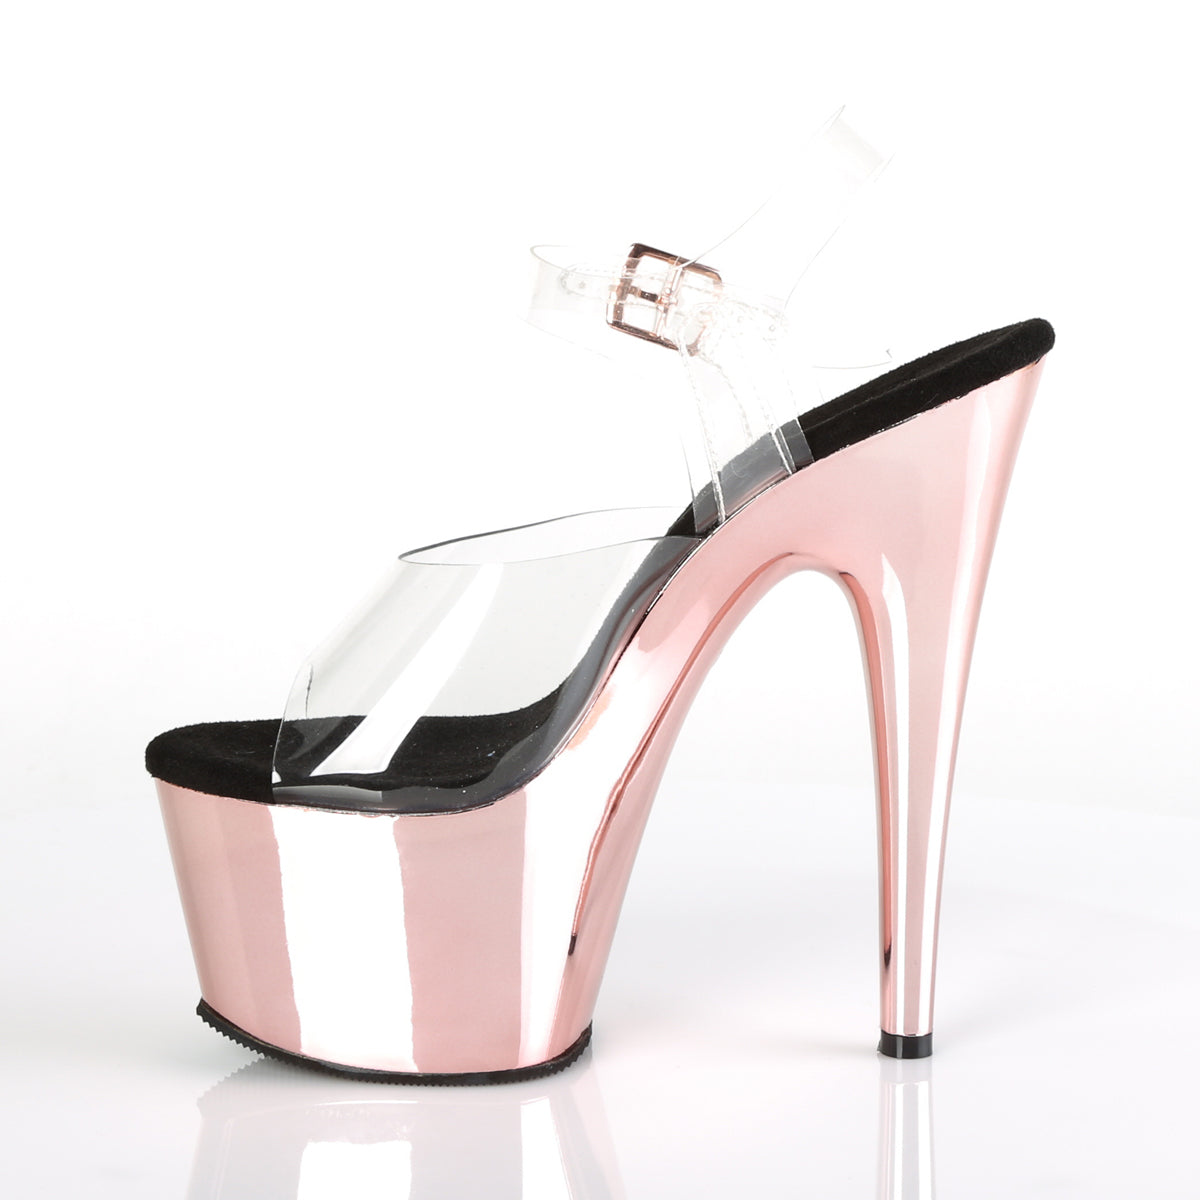 ADORE-708 / C / ROGLDCH 7 "PLEASER FAST DELIVERY 24-48h 